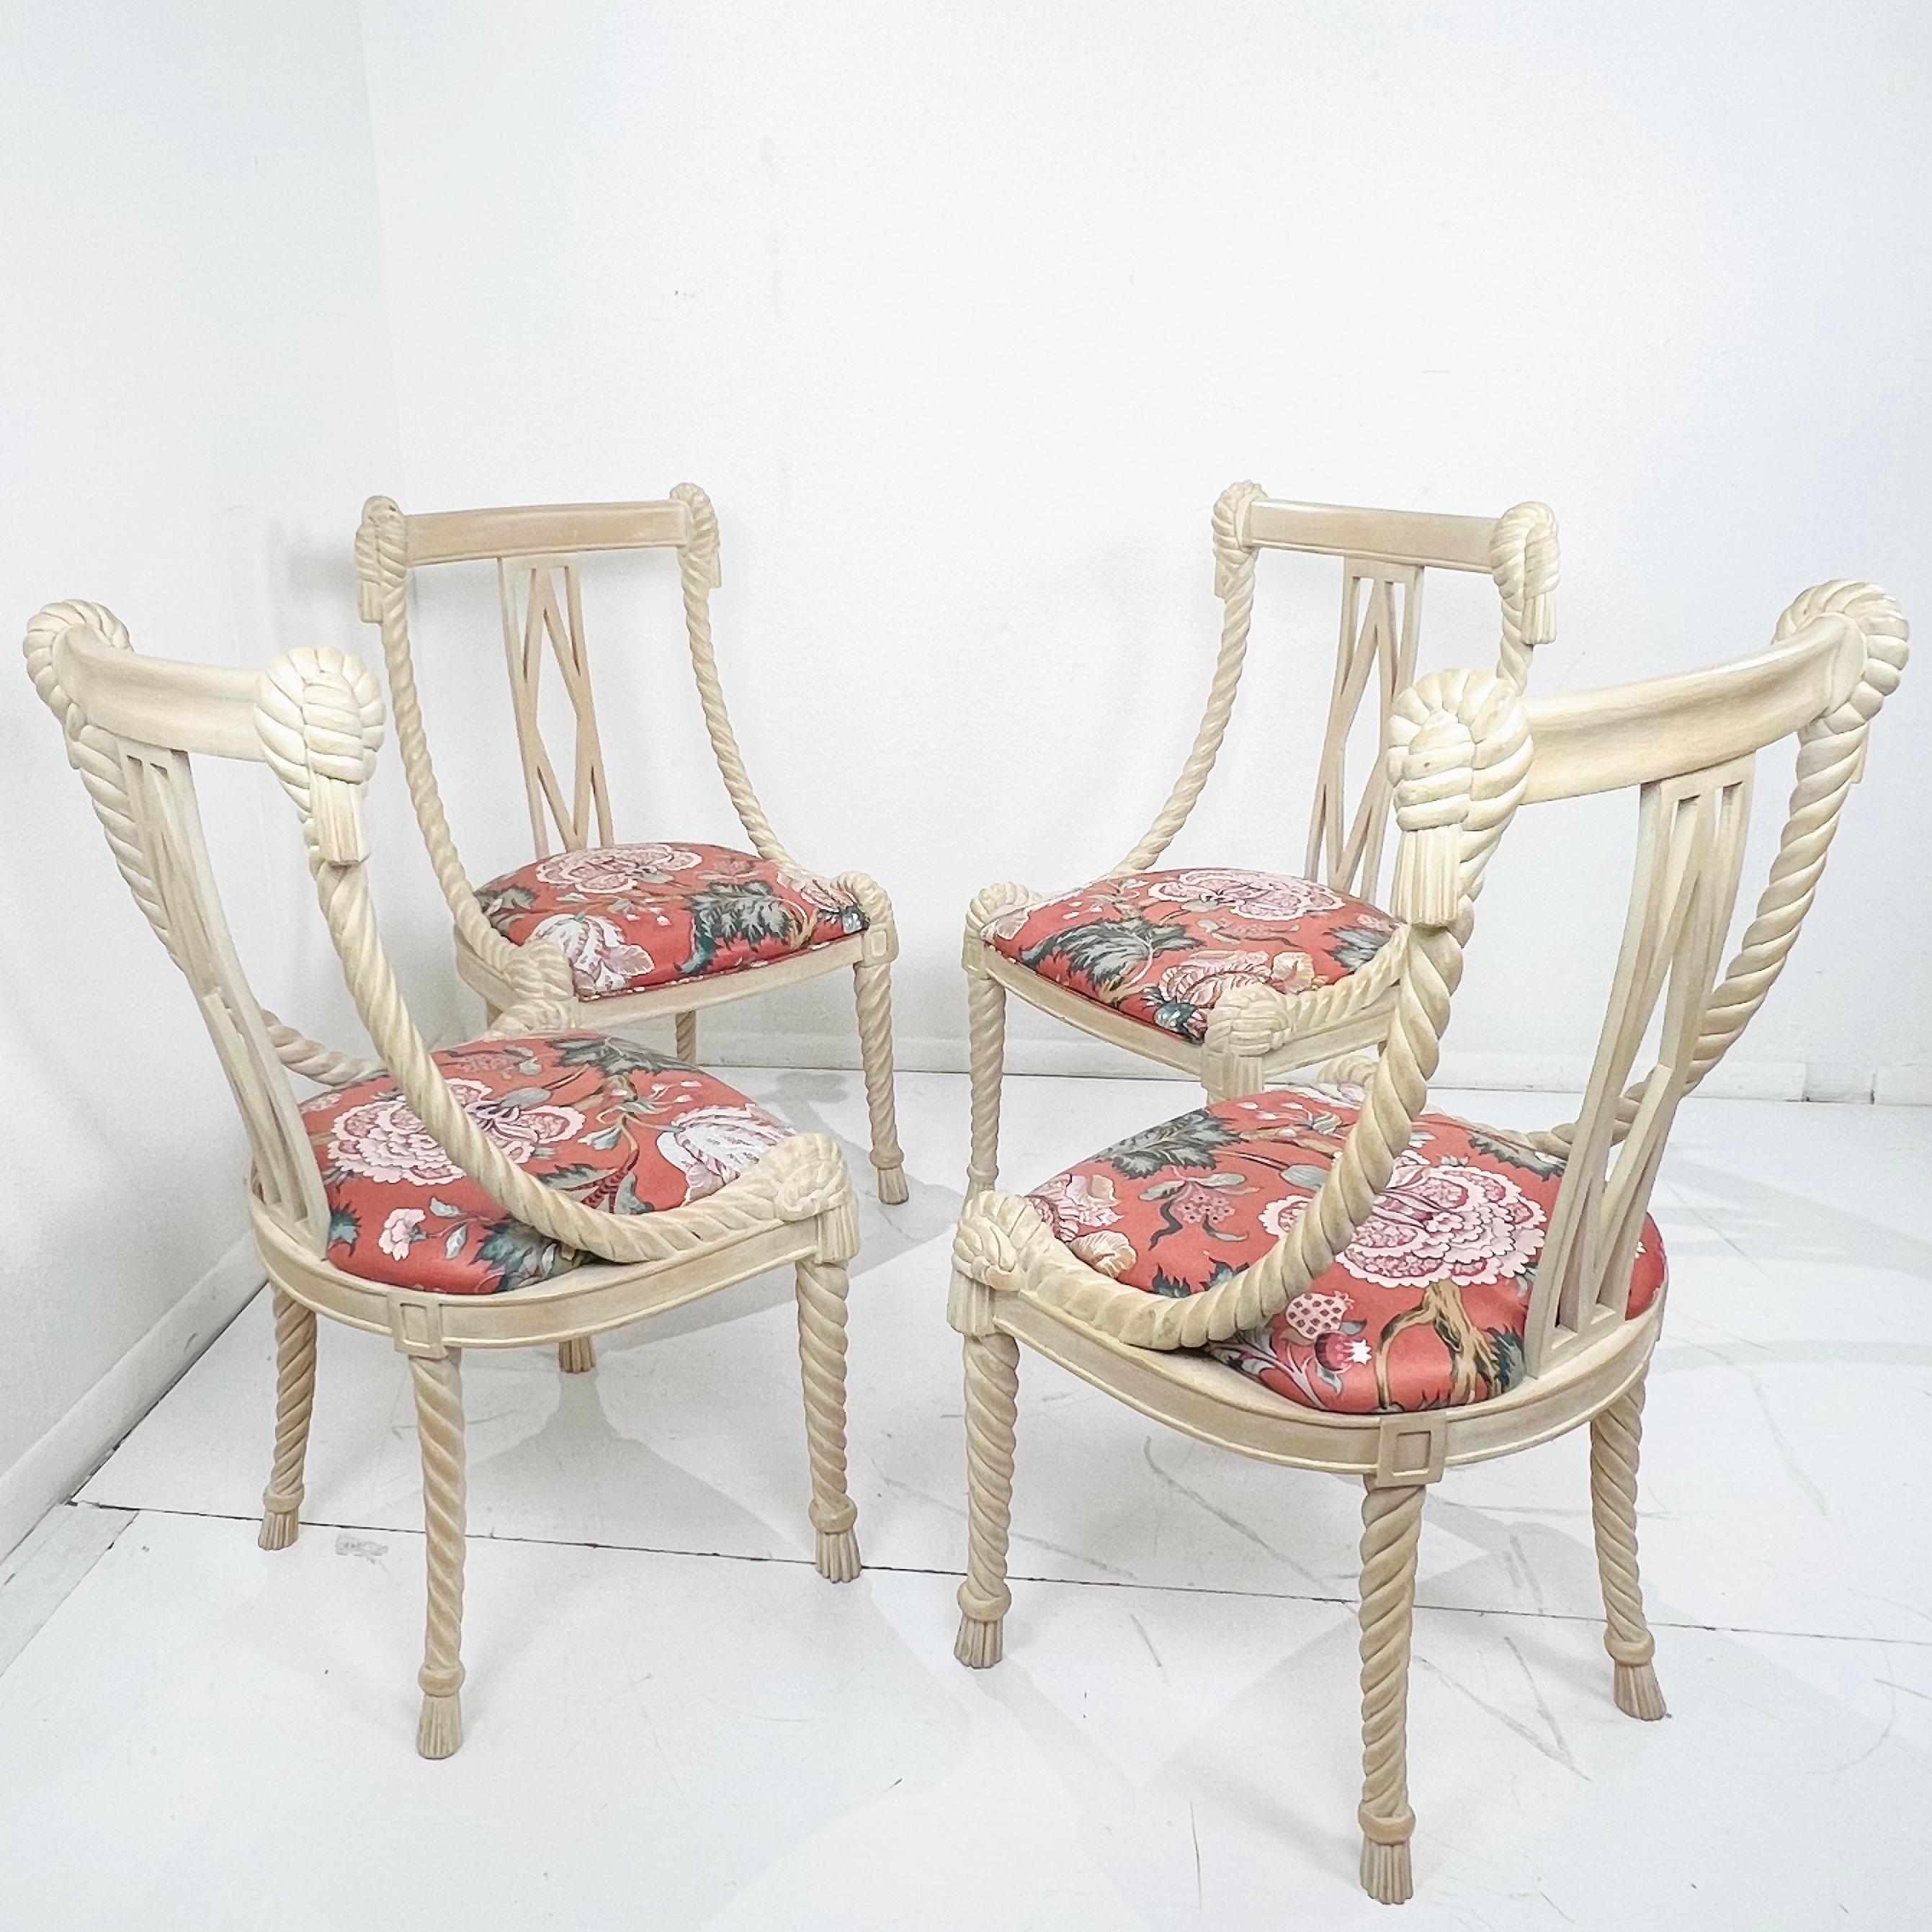 Set of 4 Carved Wood Rope & Tassel Dining Chairs In Good Condition For Sale In Dallas, TX